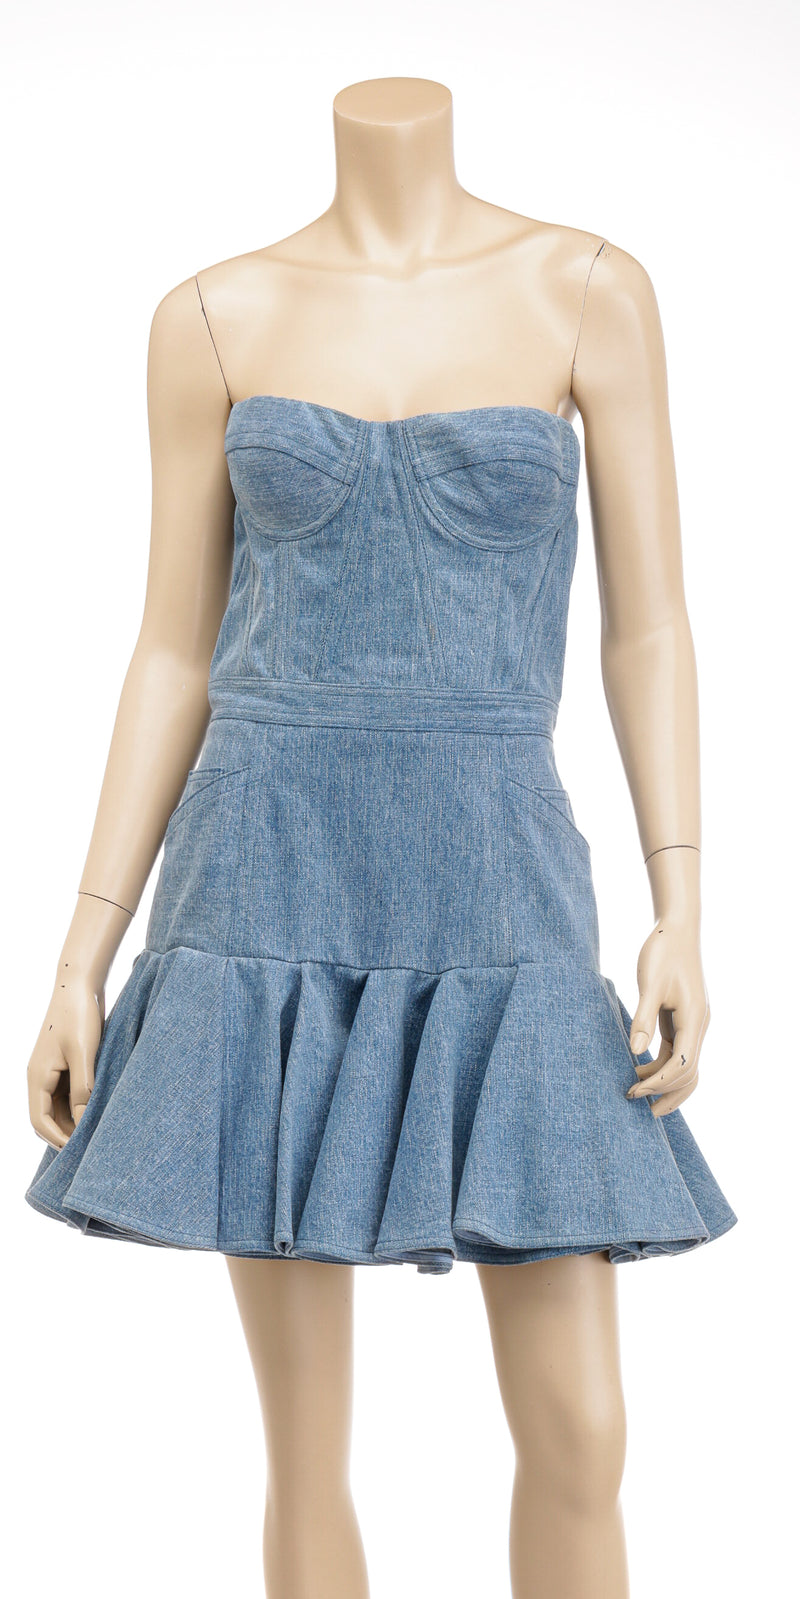 20 Outfits with Balmain Denim Dresses glamhere.com Balmain Denim Dress |  Denim mini dress, Dress, Denim dress